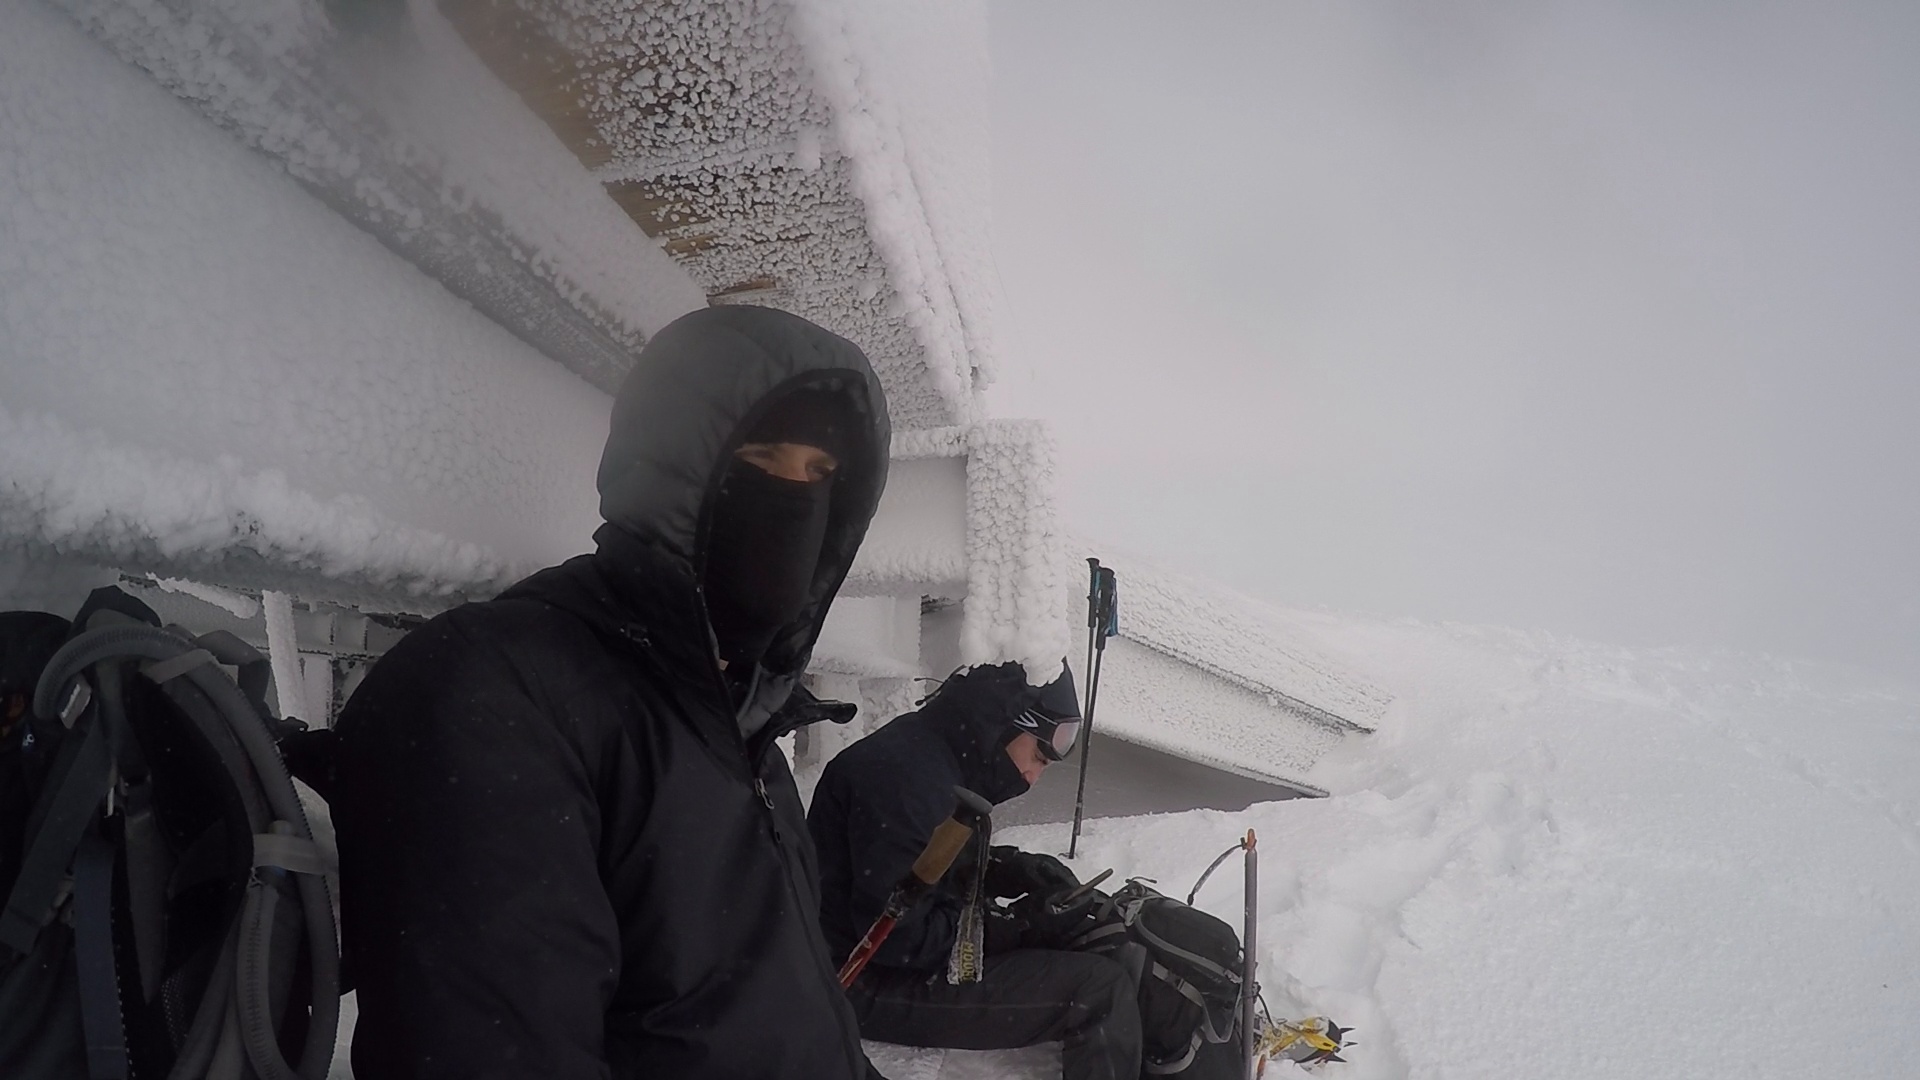 Photo taken December 2015 - We picked a day to hike to the end of Palmer Snowfield with low visibility and high winds to get a sense of what relatively bad conditions might feel like.